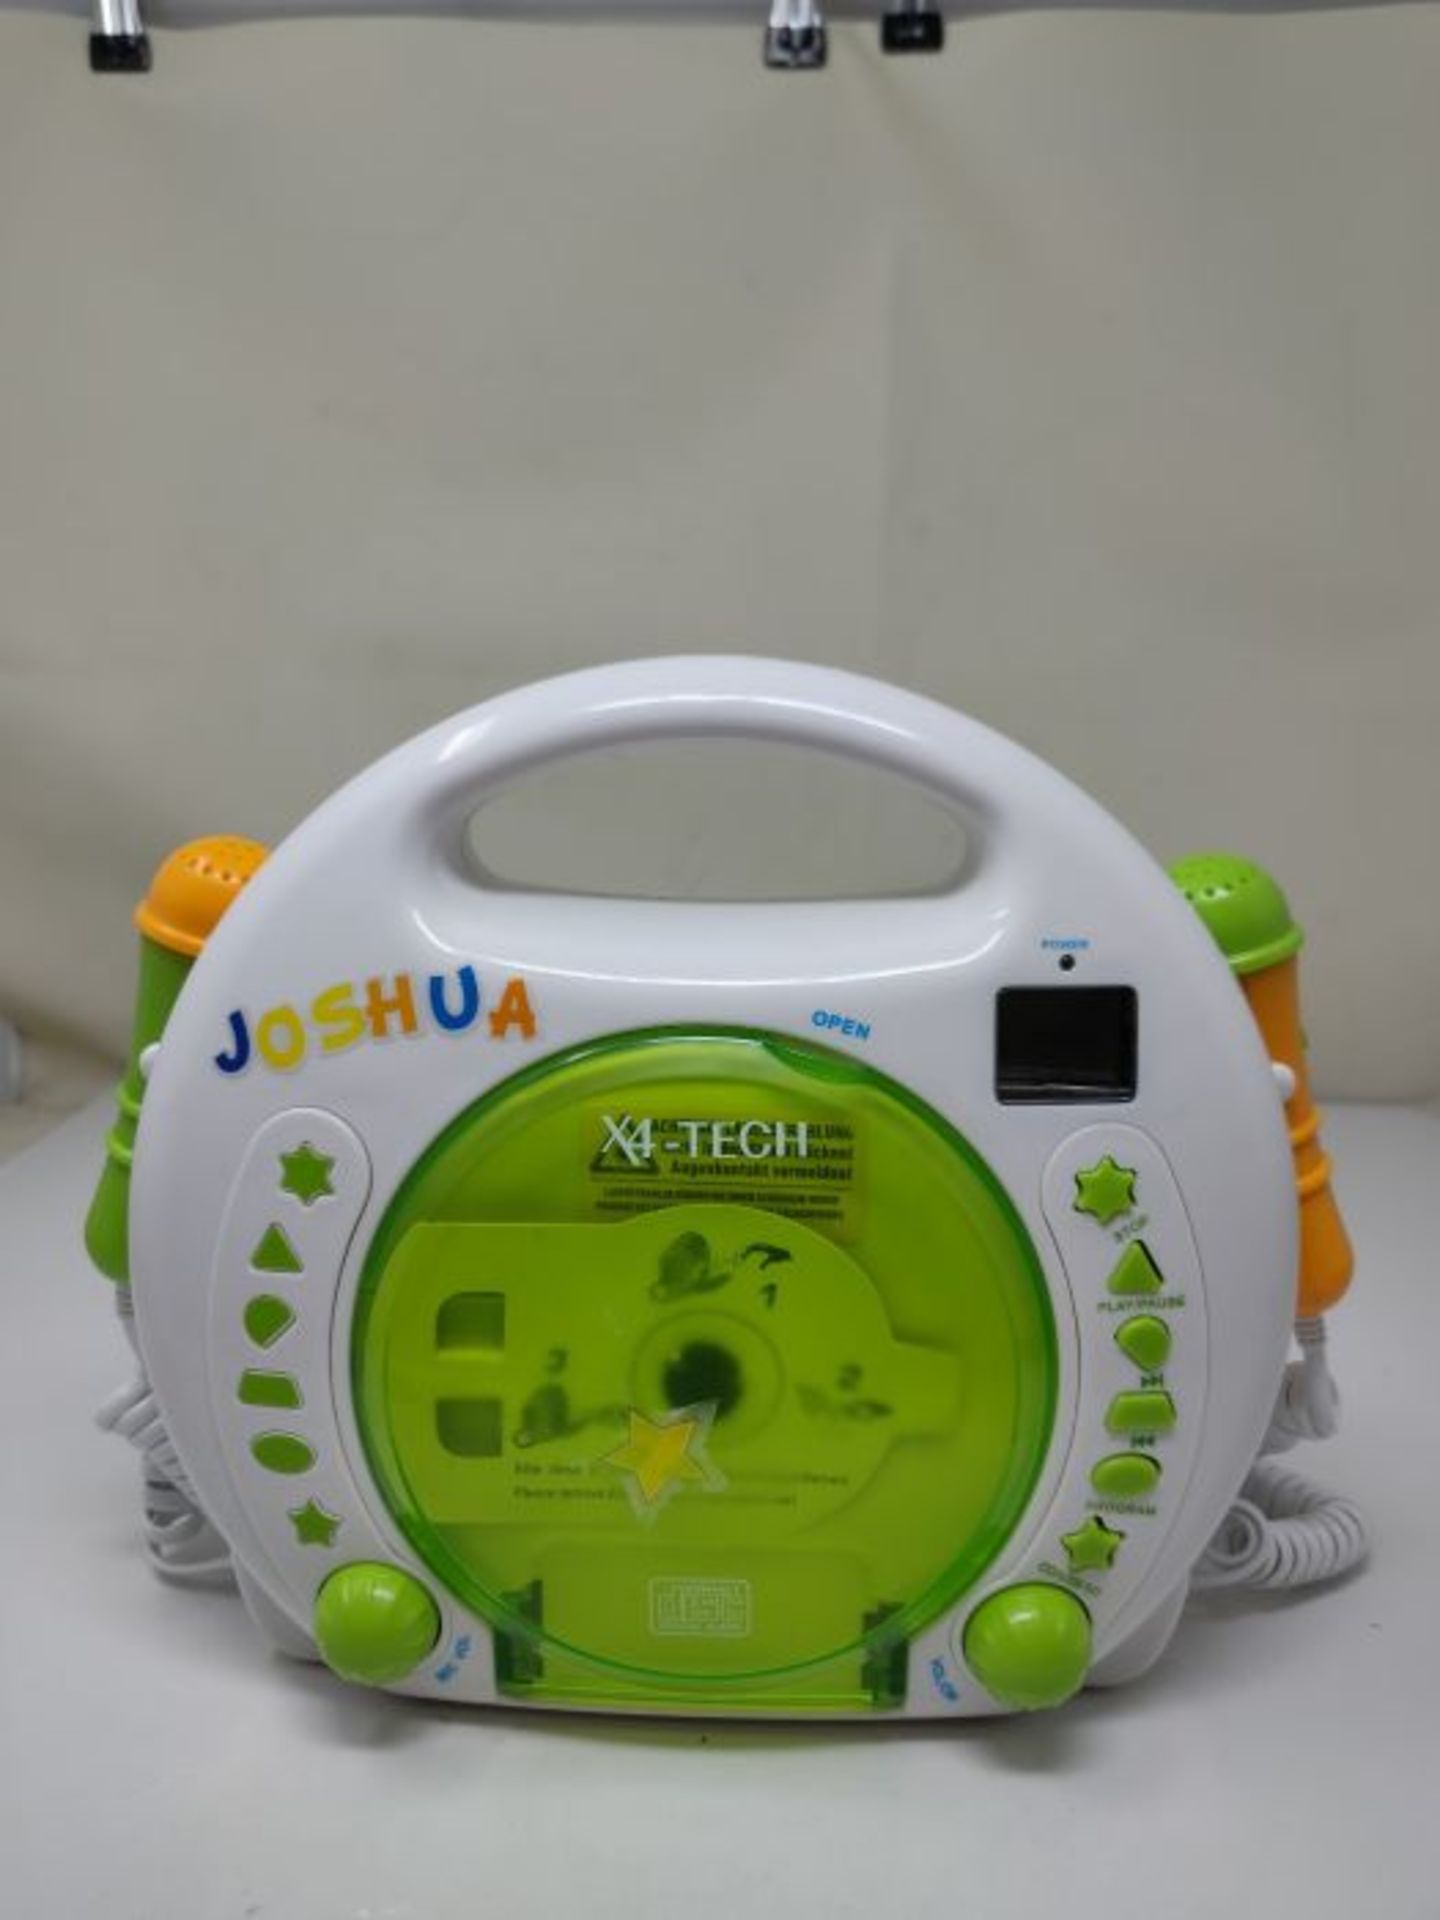 X4-TECH children's CD player Bobby Joey MP3 with battery and power supply - Image 3 of 3